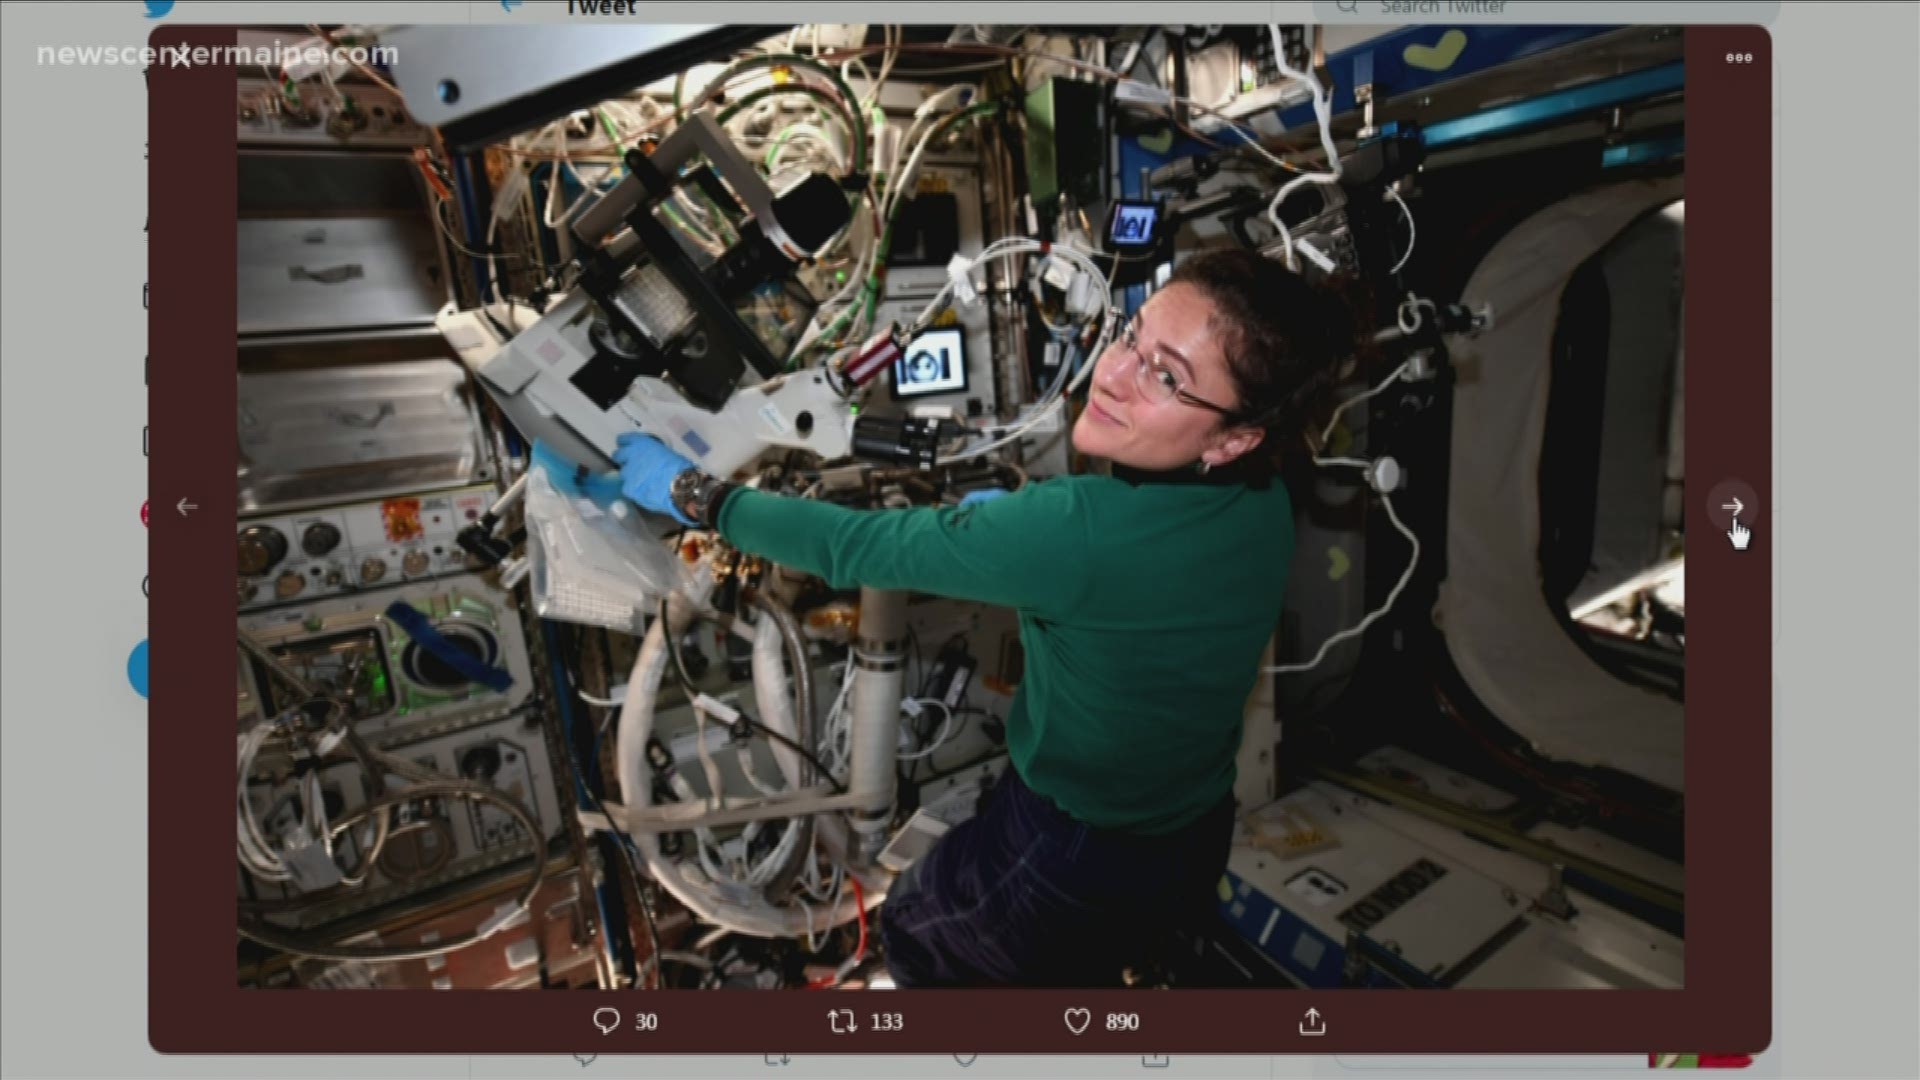 Meir tweeted Tuesday that she was already conducting research within 36 hours of her arrival on the ISS last week.